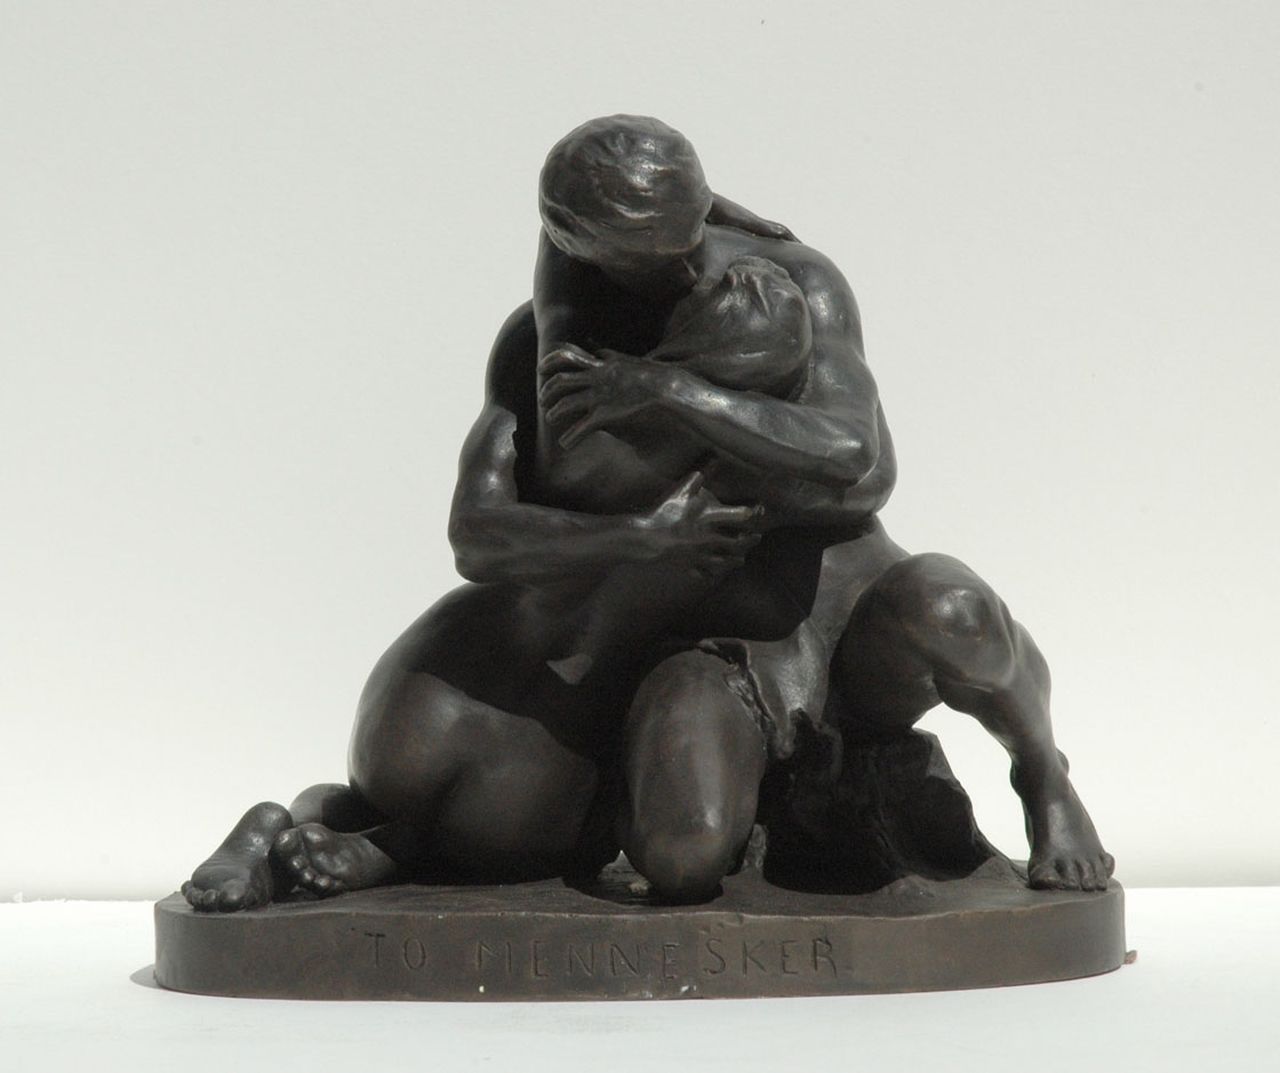 Sinding S.A.  | Stephan Abel Sinding, Two people, bronze 25.8 x 28.5 cm, signed on the base and dated 1889